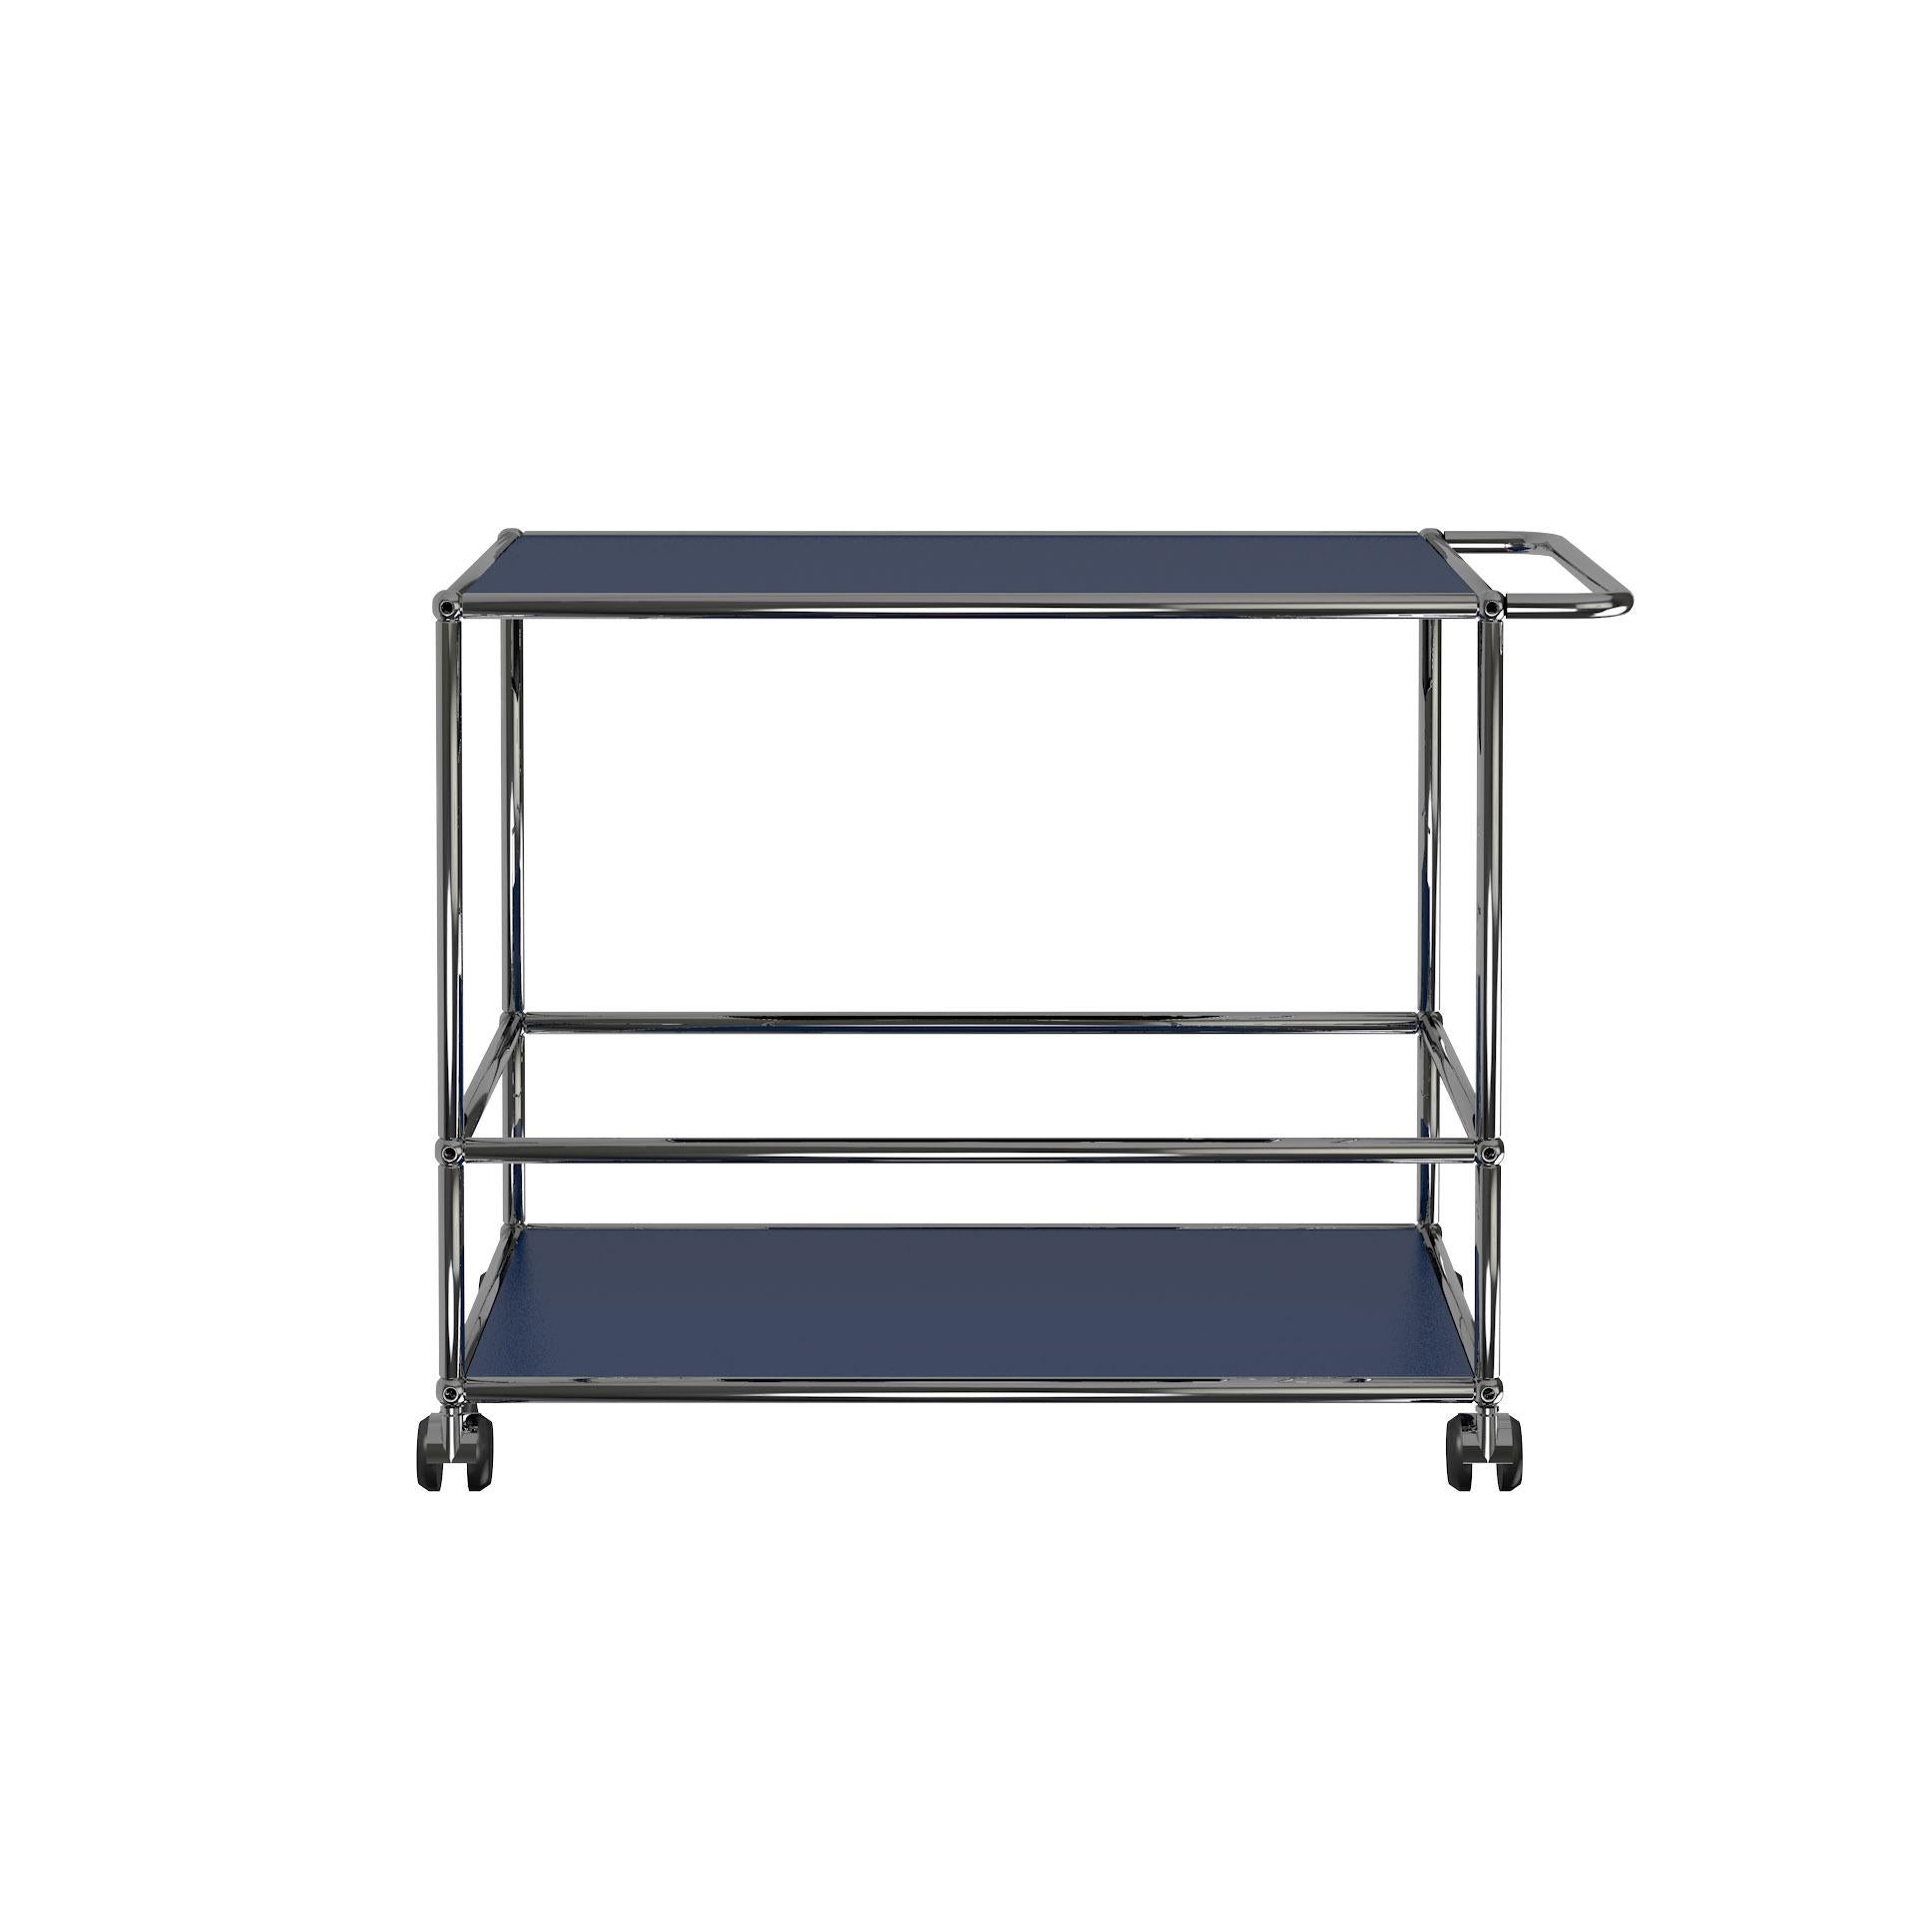 Swiss USM Bar Cart Available in 5 Different Color Options For Sale